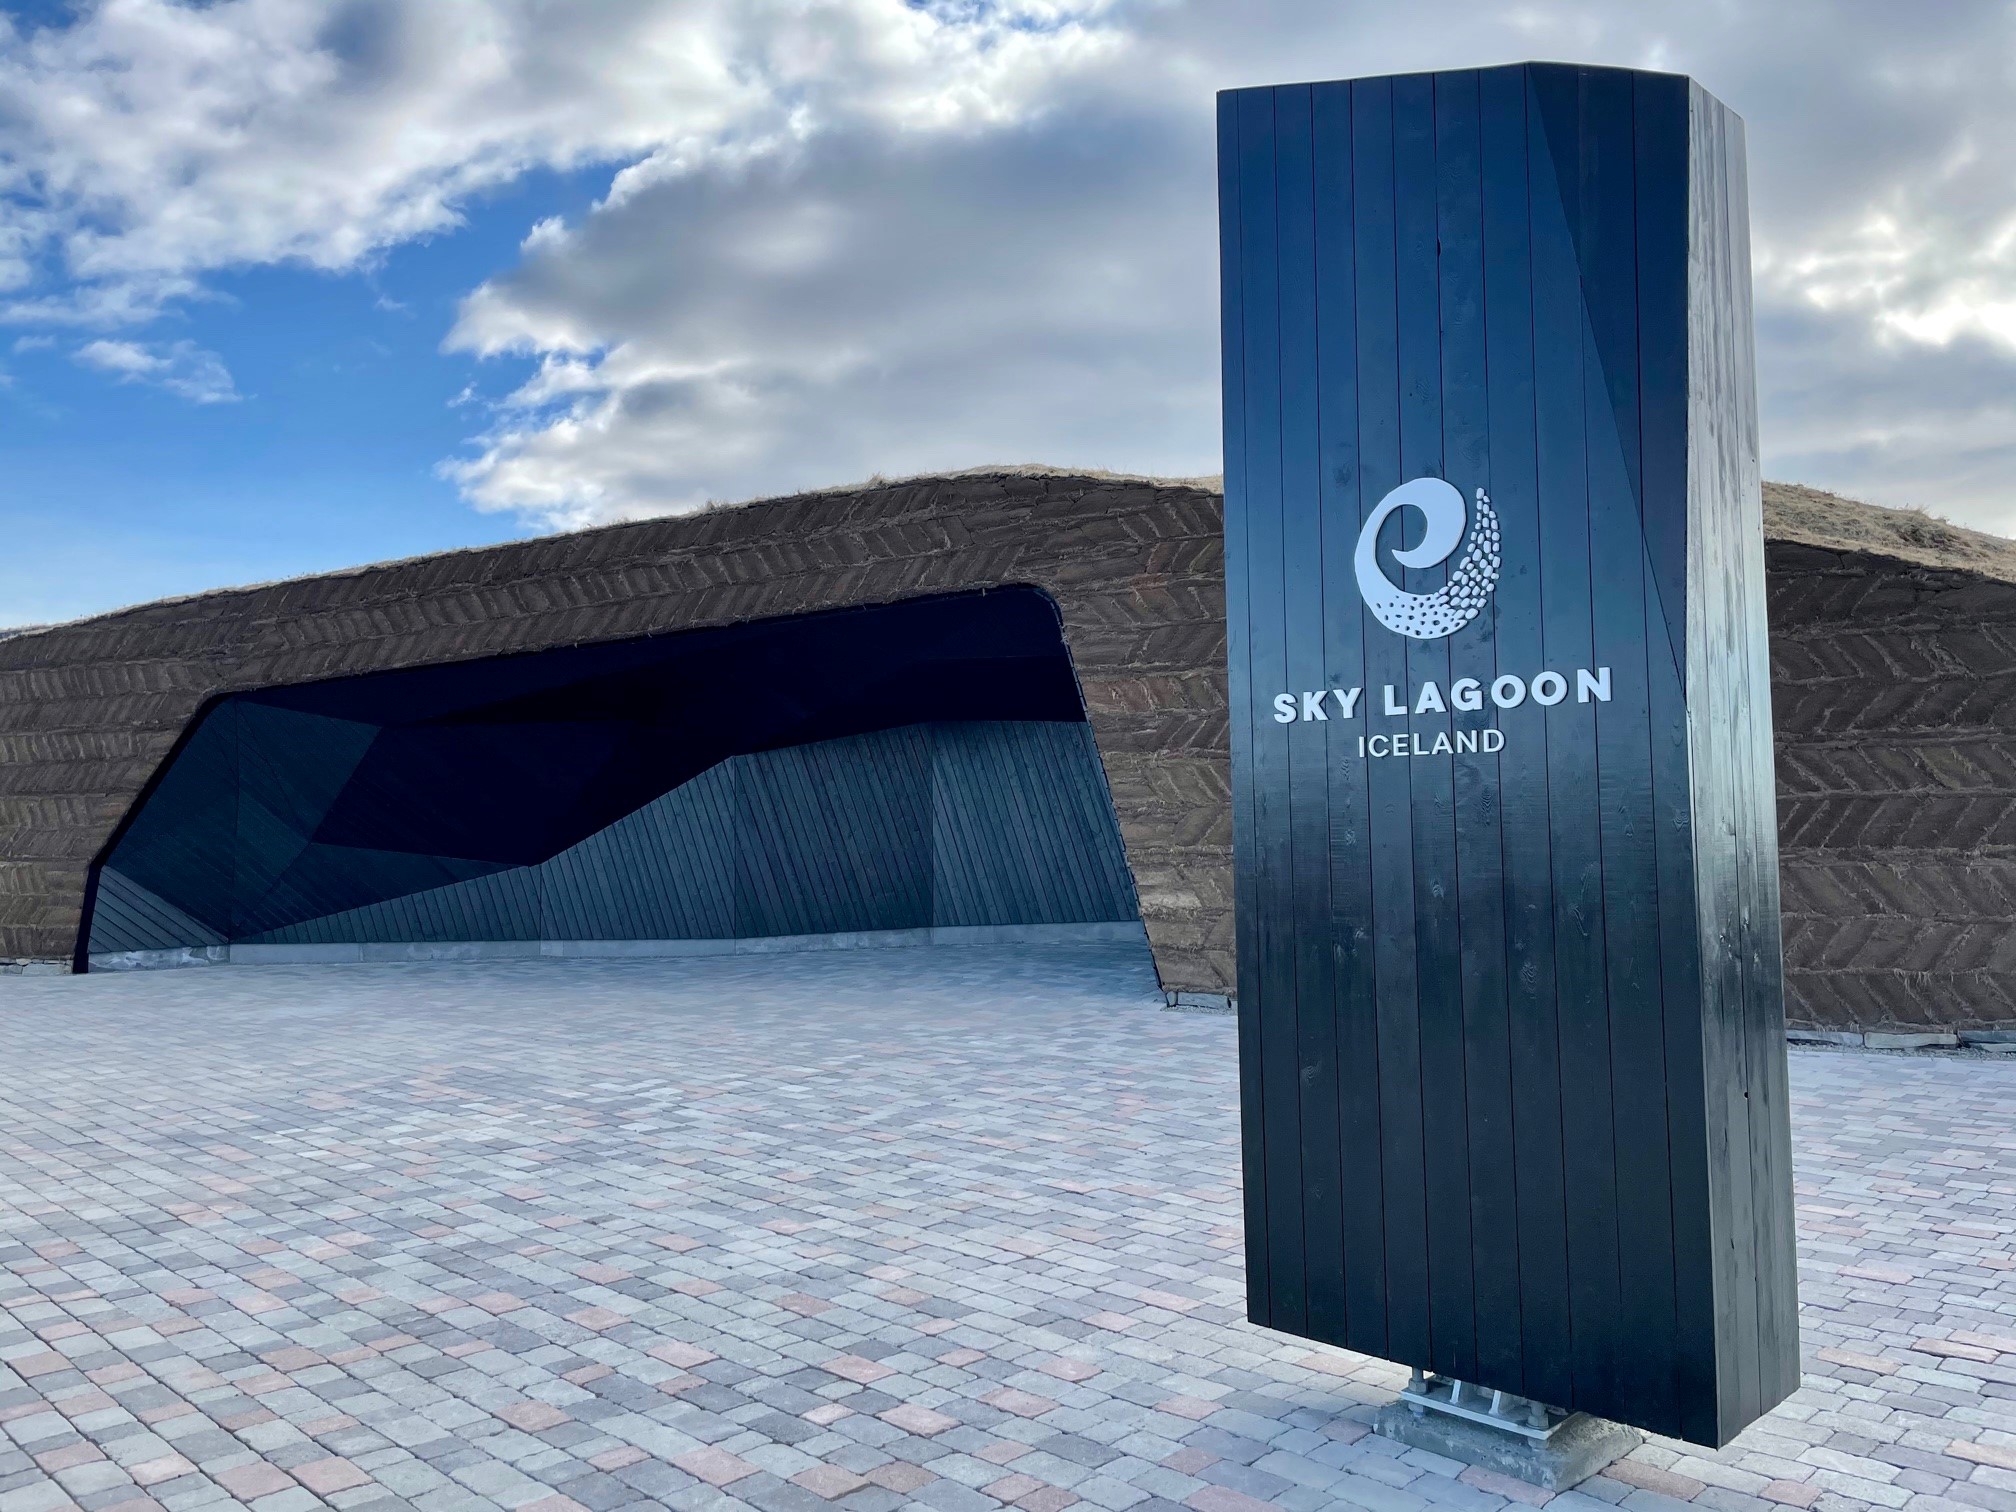 The exterior entrance of the Sky Lagoon in Reykjavik - a signpost stands before the rocky entrance